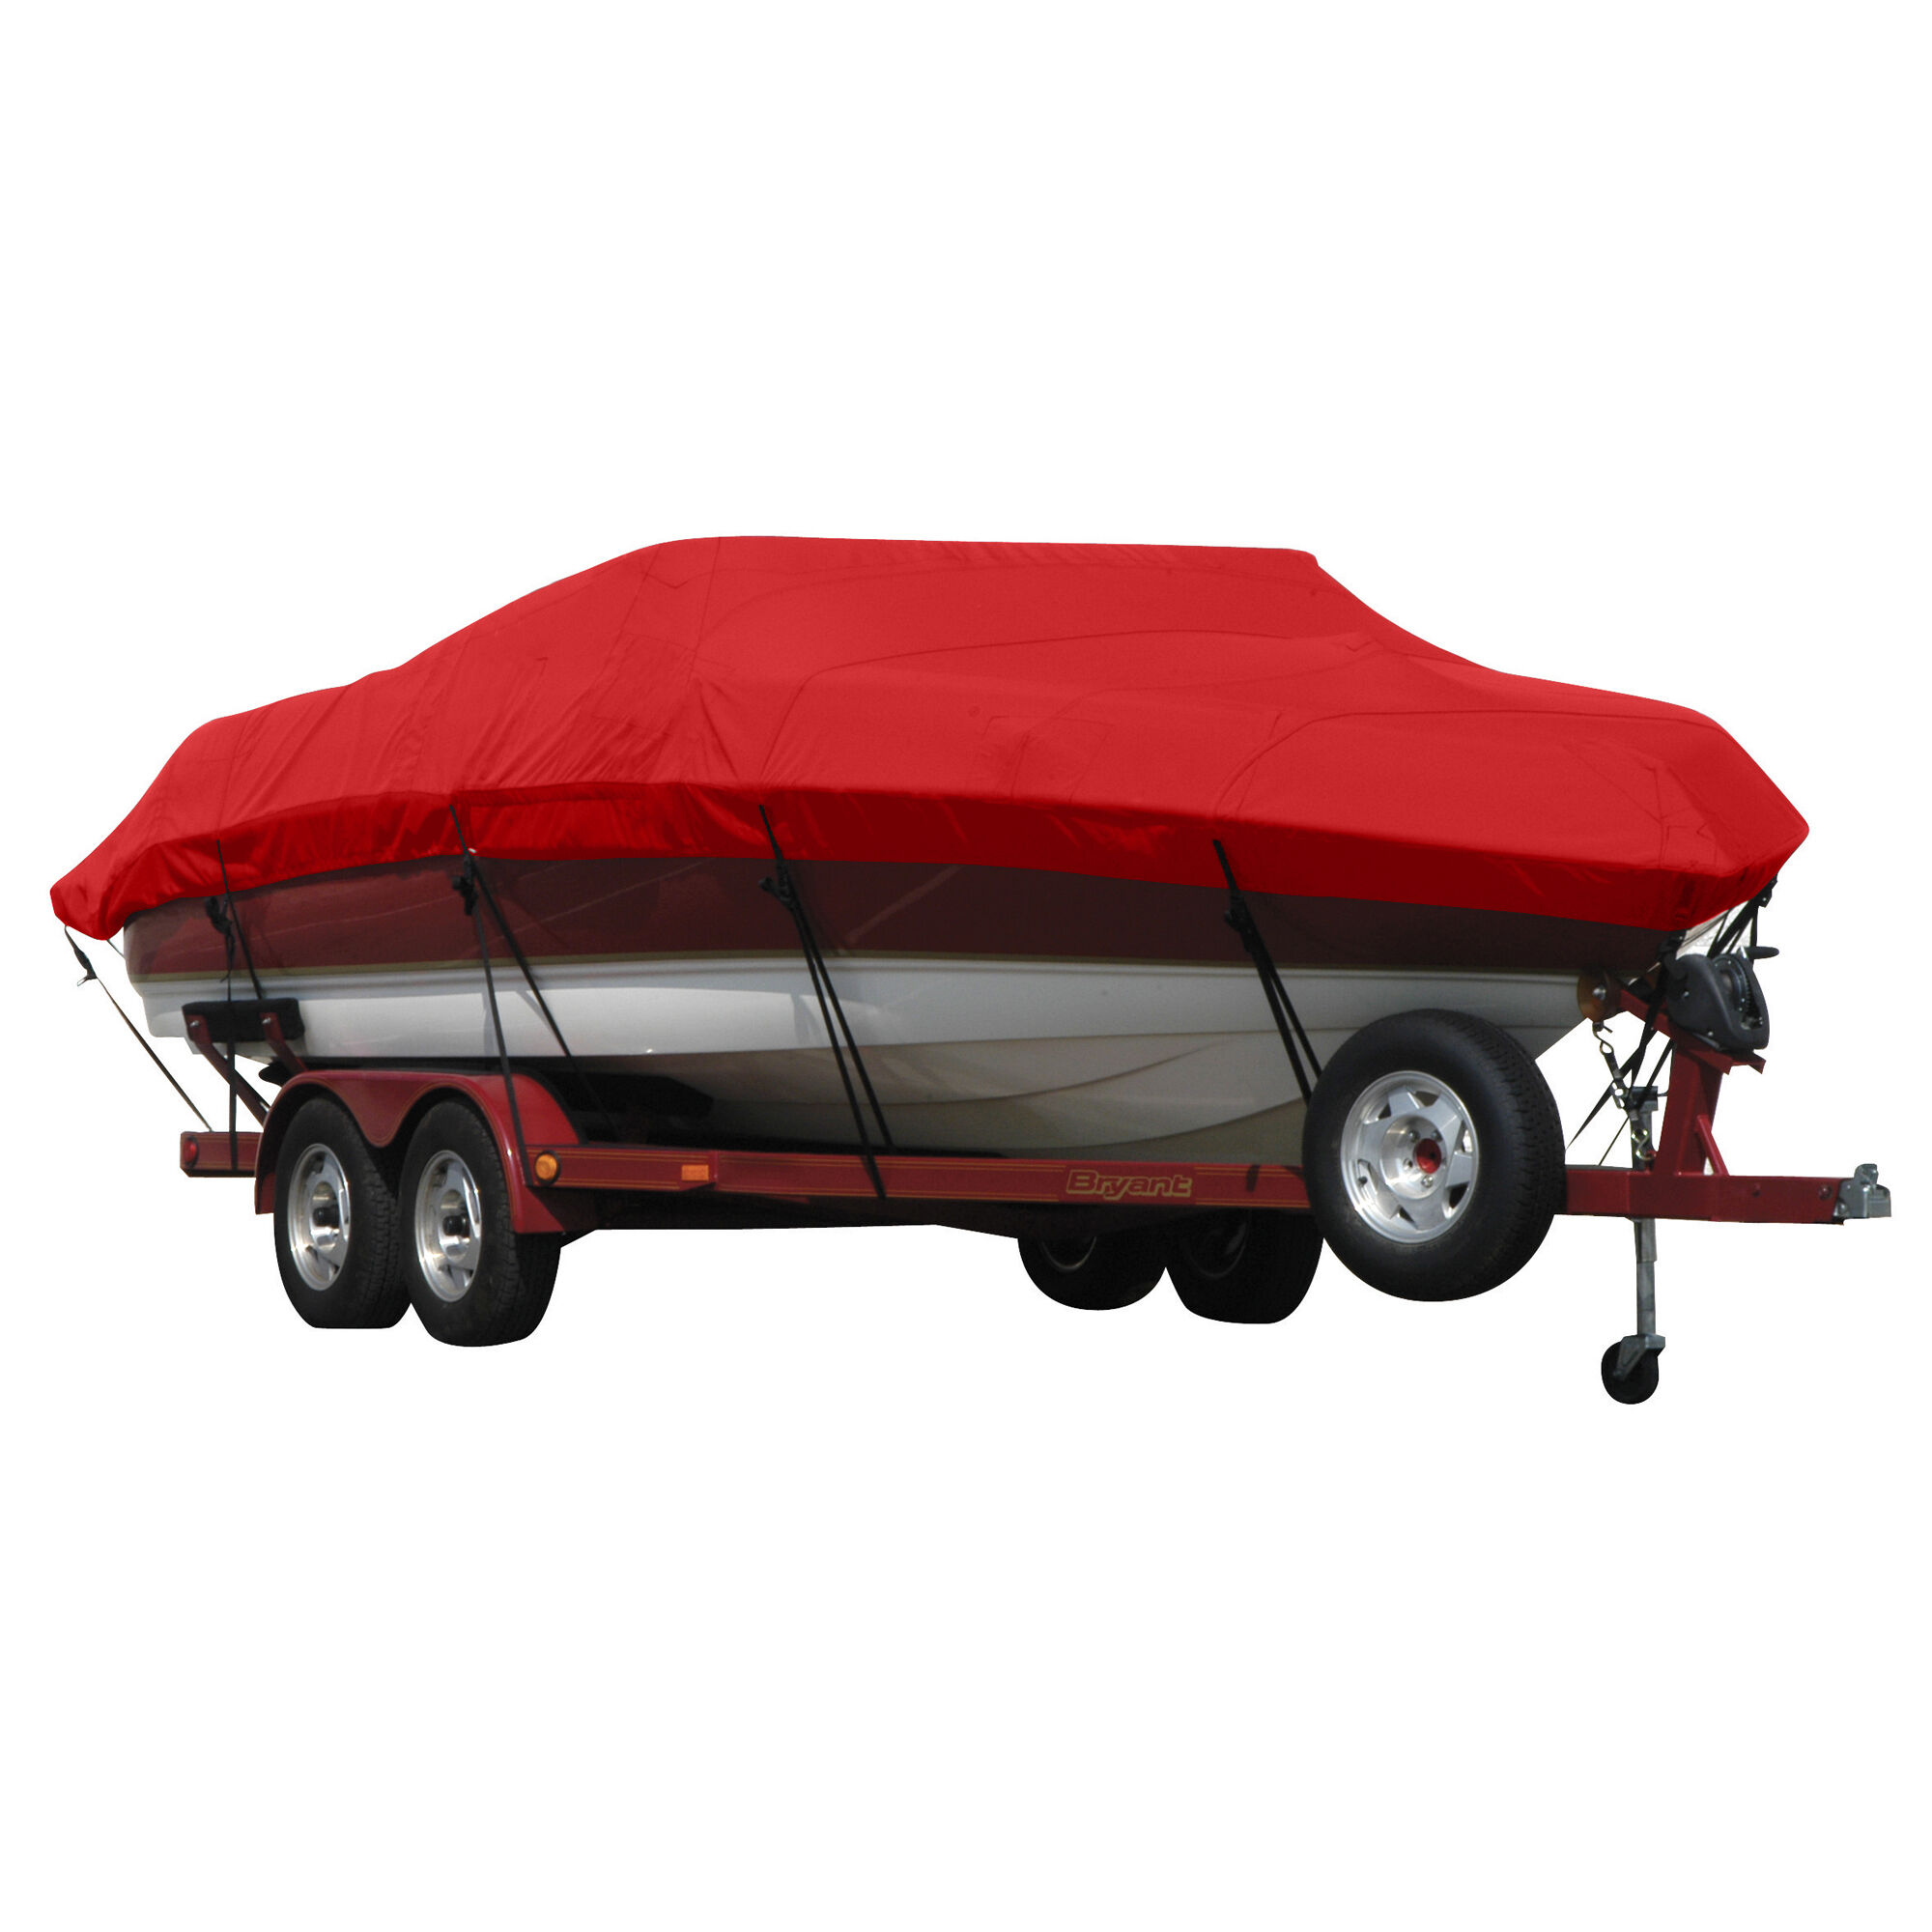 Covermate Exact Fit Sunbrella Boat Cover for Tahoe 222 222 Deck Boat Bimini Laid Aft Doesn't Cover Ski Tow Bar I/O. Jockey Red Acrylic